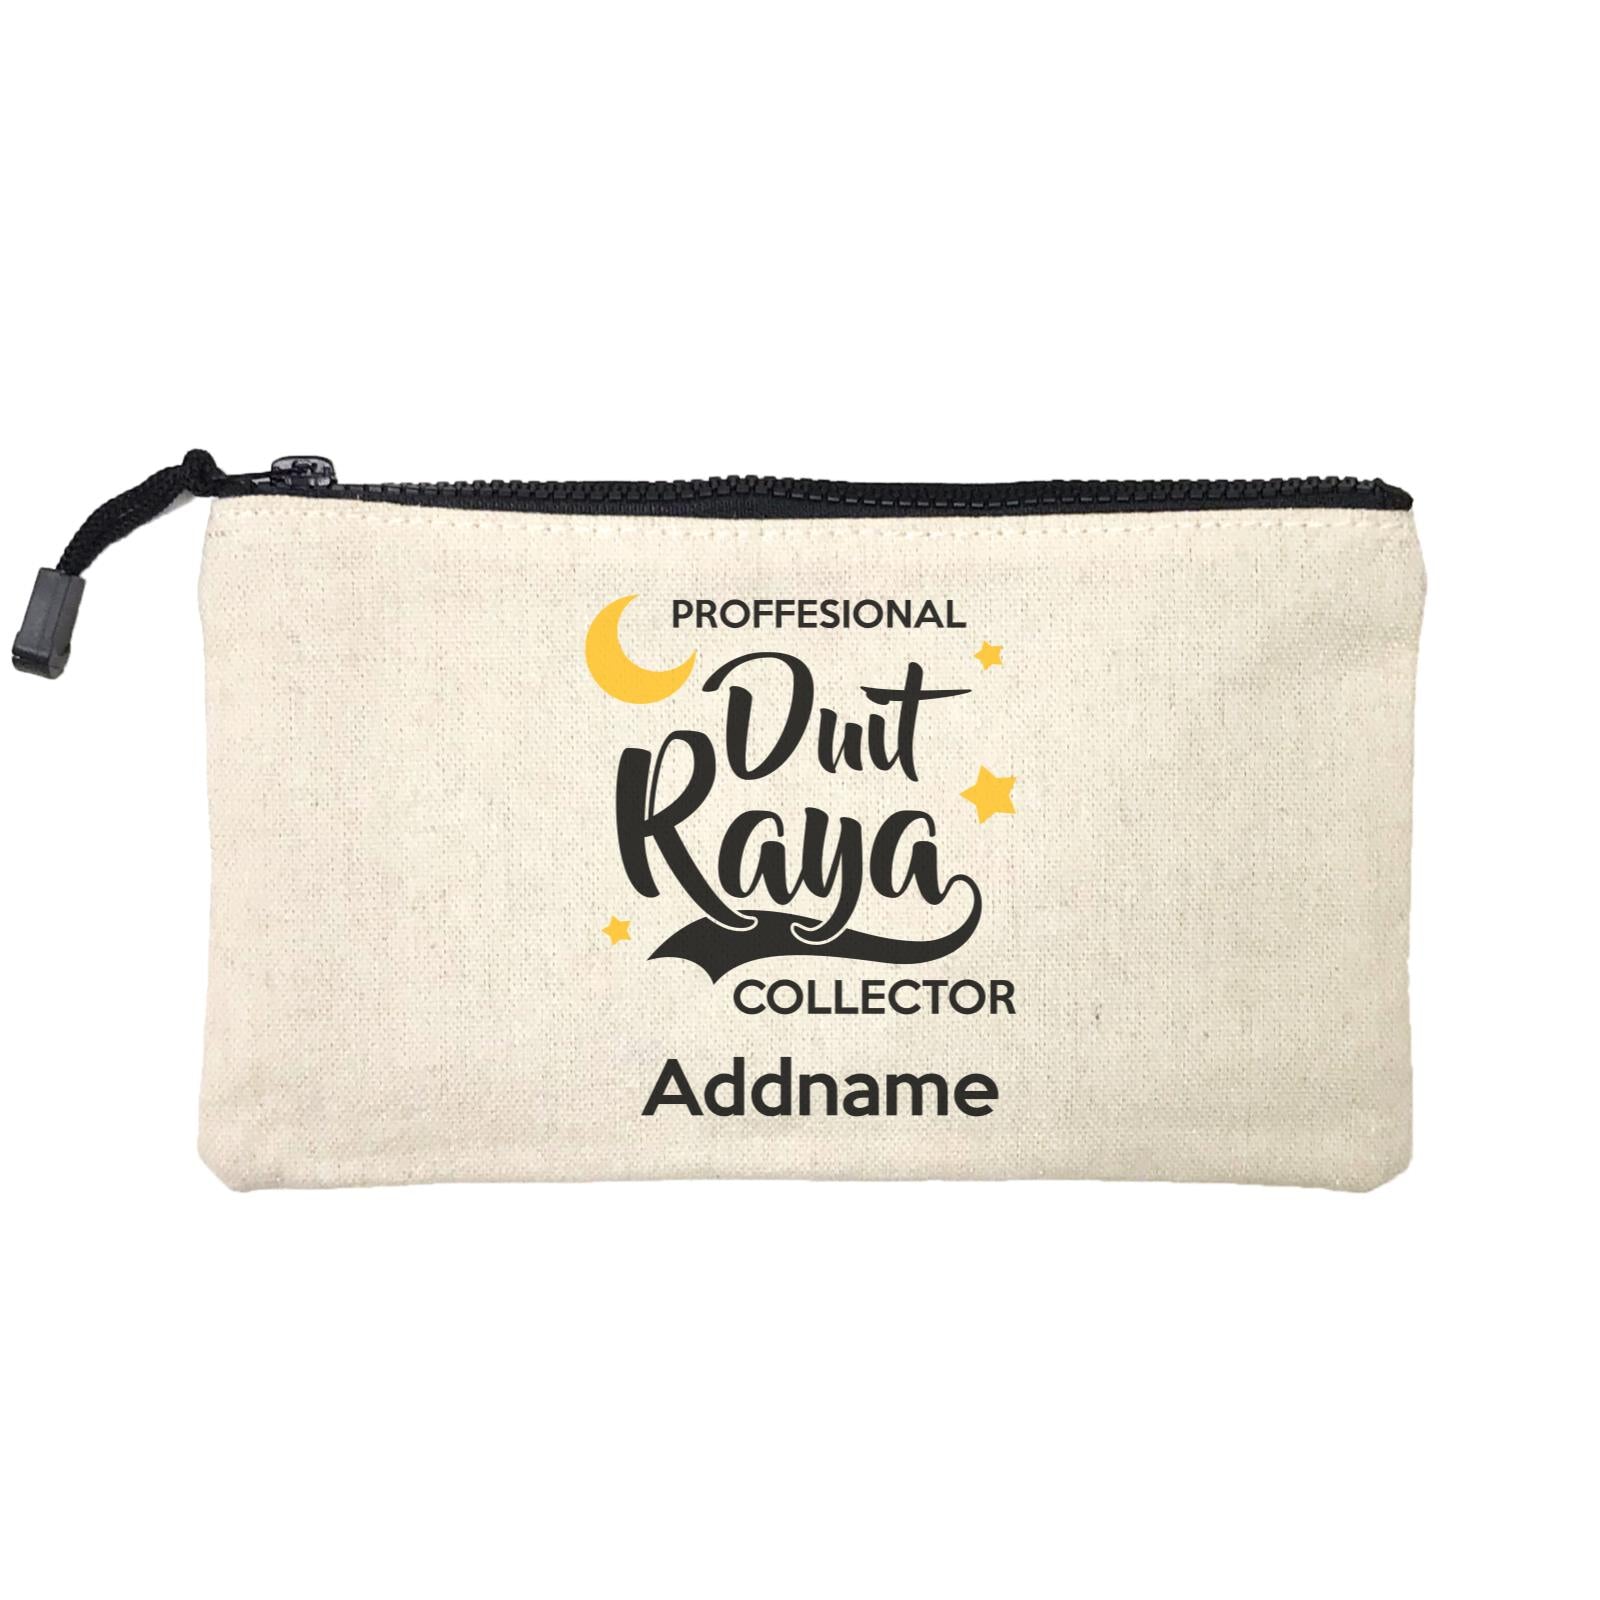 Raya Typography Professional Duit Raya Collector Addname Mini Accessories Stationery Pouch